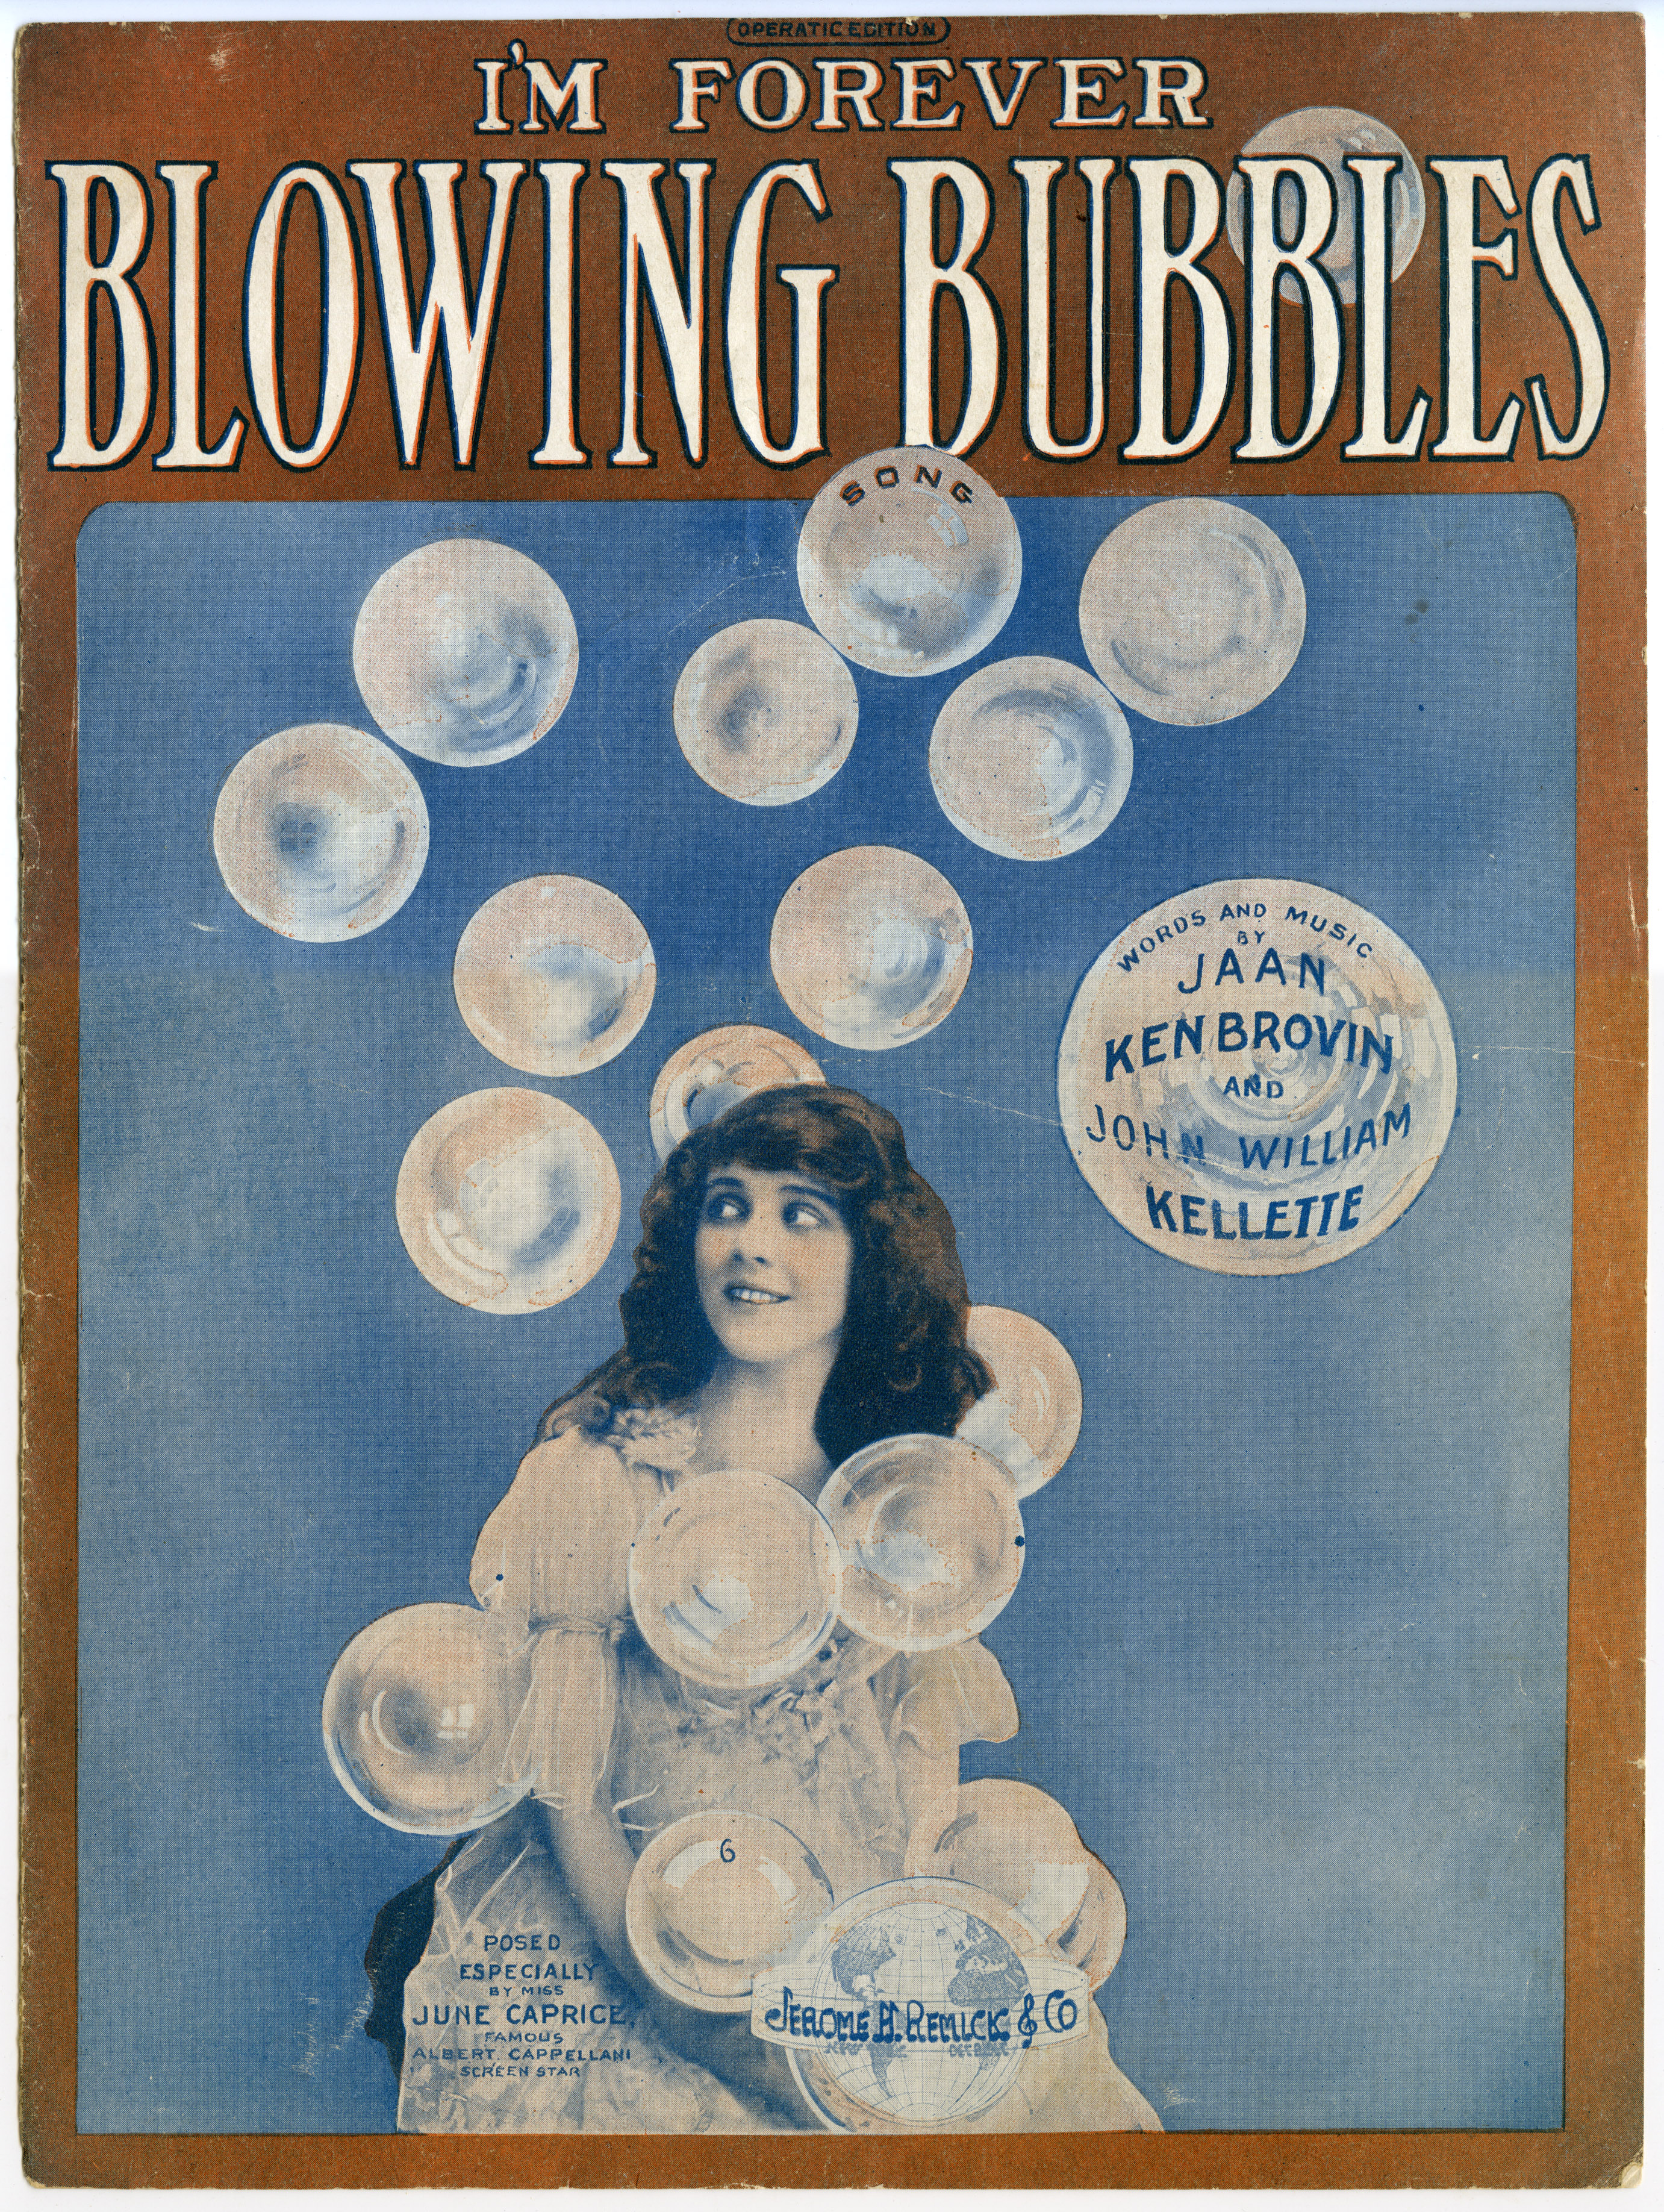 Depiction of I'm forever blowing bubbles